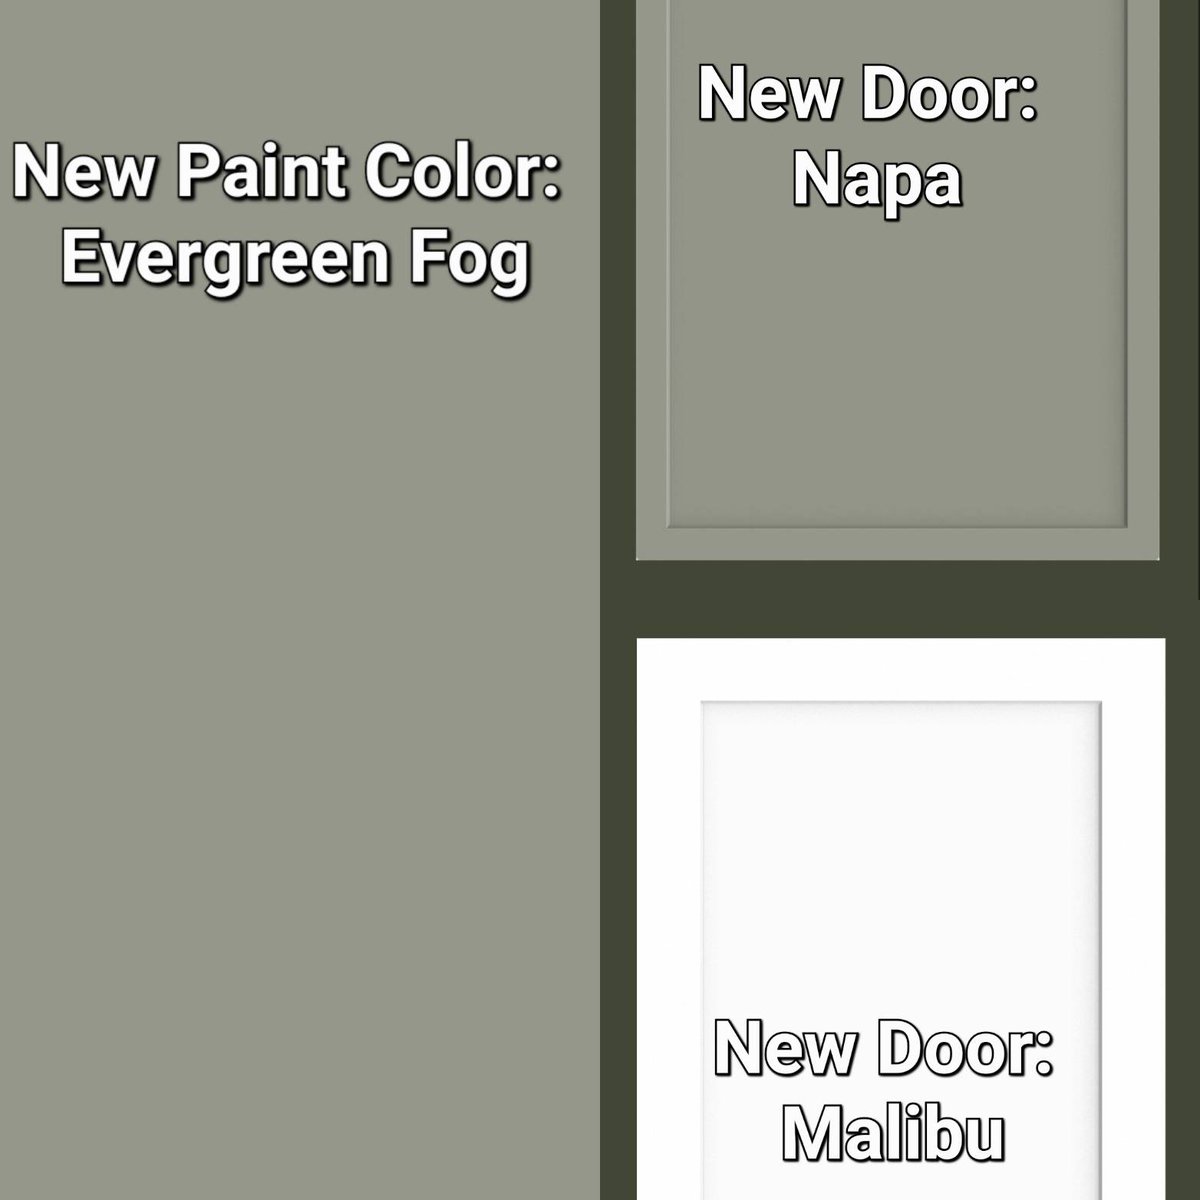 One new paint color and two new doors!    

These new doors are made of one piece of MDF, so there is no risk of cracking at the seams. 

Come to our showroom to see them in person!

#greenpaint #sage #olive #onepiecedoors #wwwoodproducts #shilohcabinetry  #evergreenfog